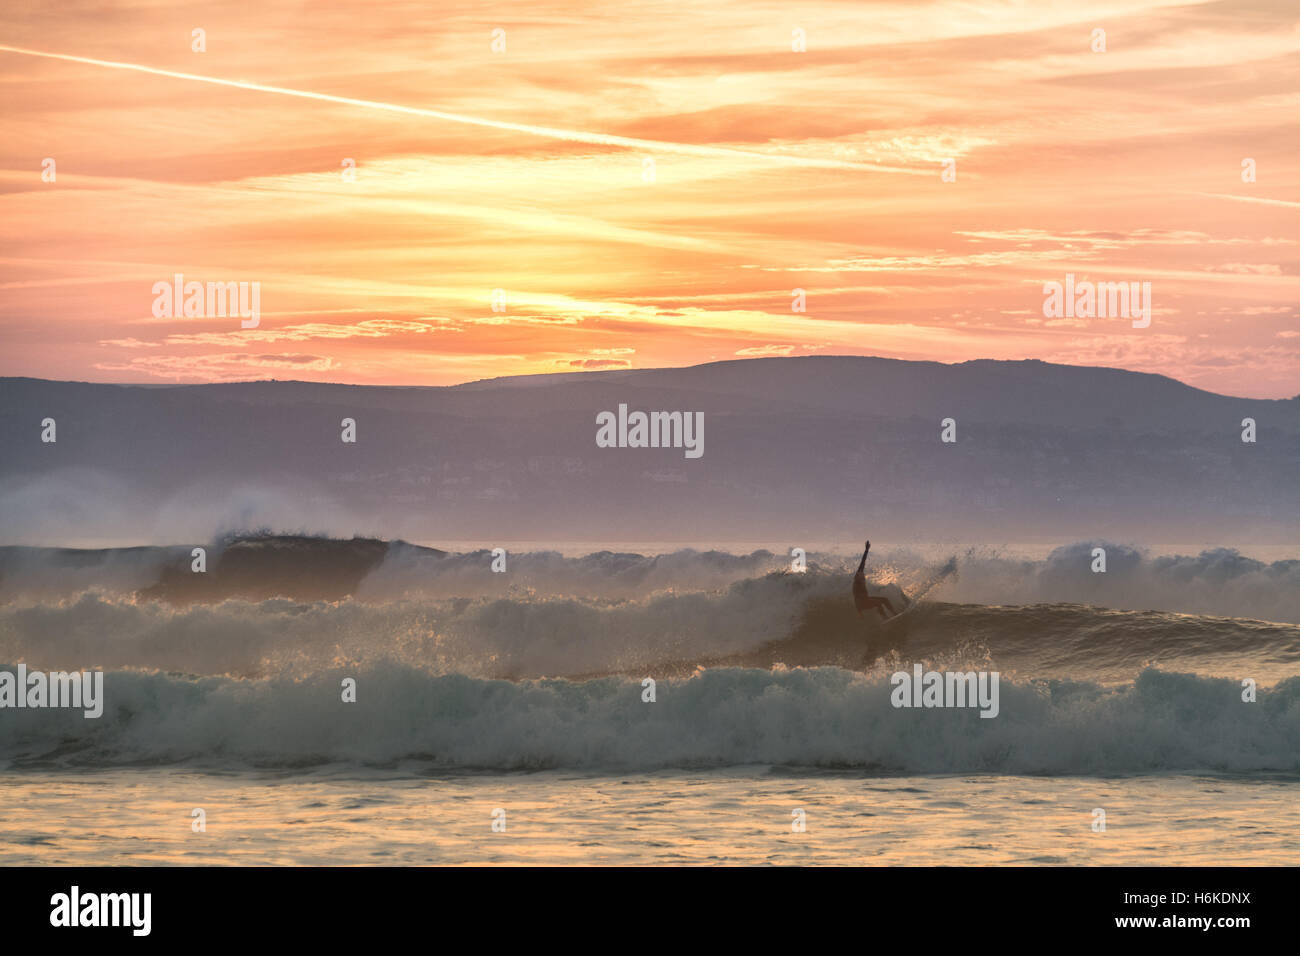 Gwithian, Cornwall, UK. 30th Cotober 2016. UK Weather. With temperatures at sunset of 17 degrees C, surfers and dog walkers make the most of the sea at sunset. Credit:  Simon Maycock/Alamy Live News Stock Photo